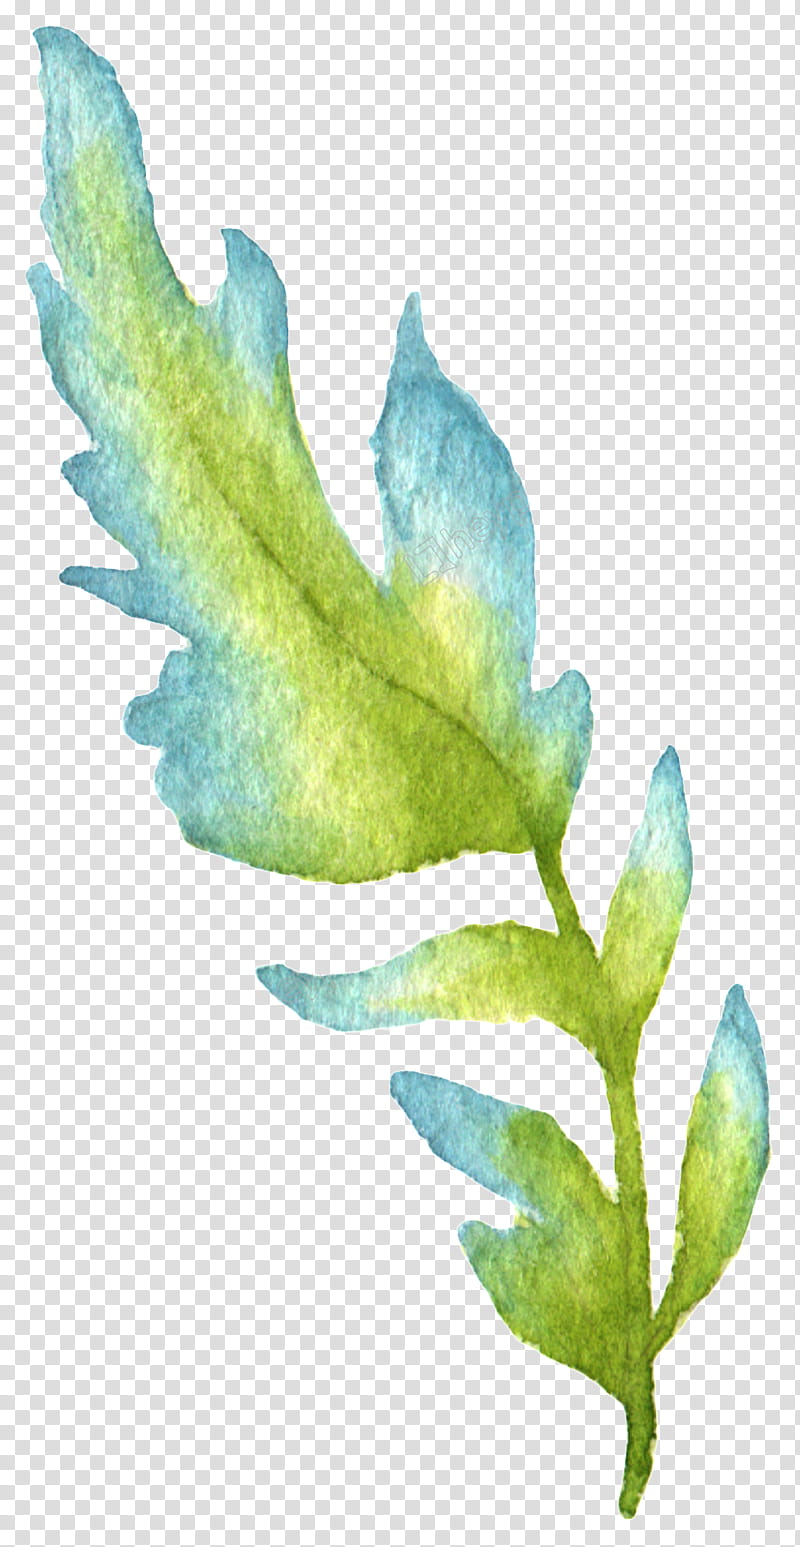 Oil Painting Flower, Leaf, Watercolor Painting, Green, Blue, Bluegreen, Aqua, Teal transparent background PNG clipart